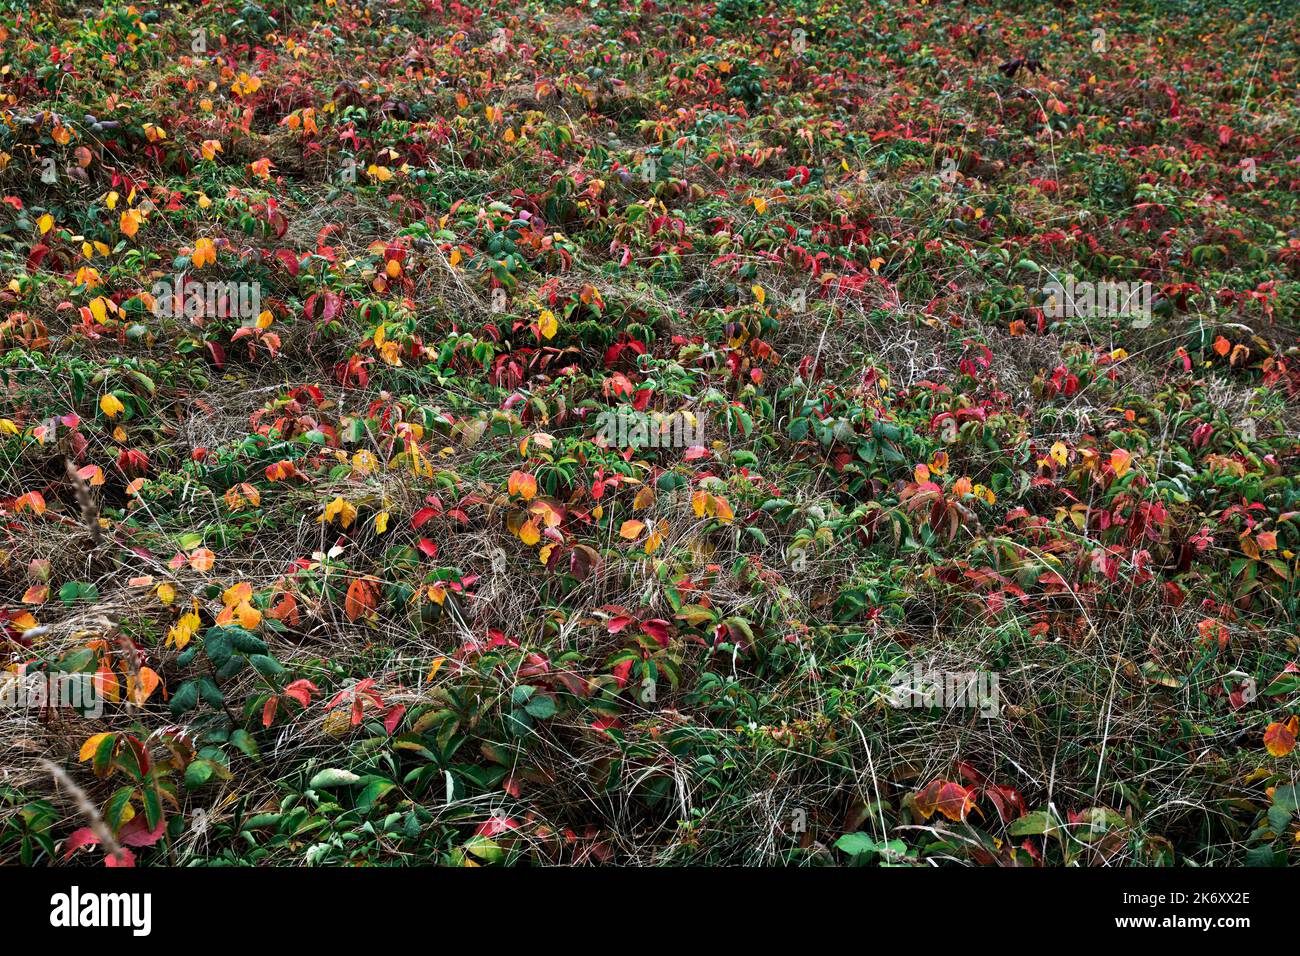 Colorful autumn ground cover. Stock Photo